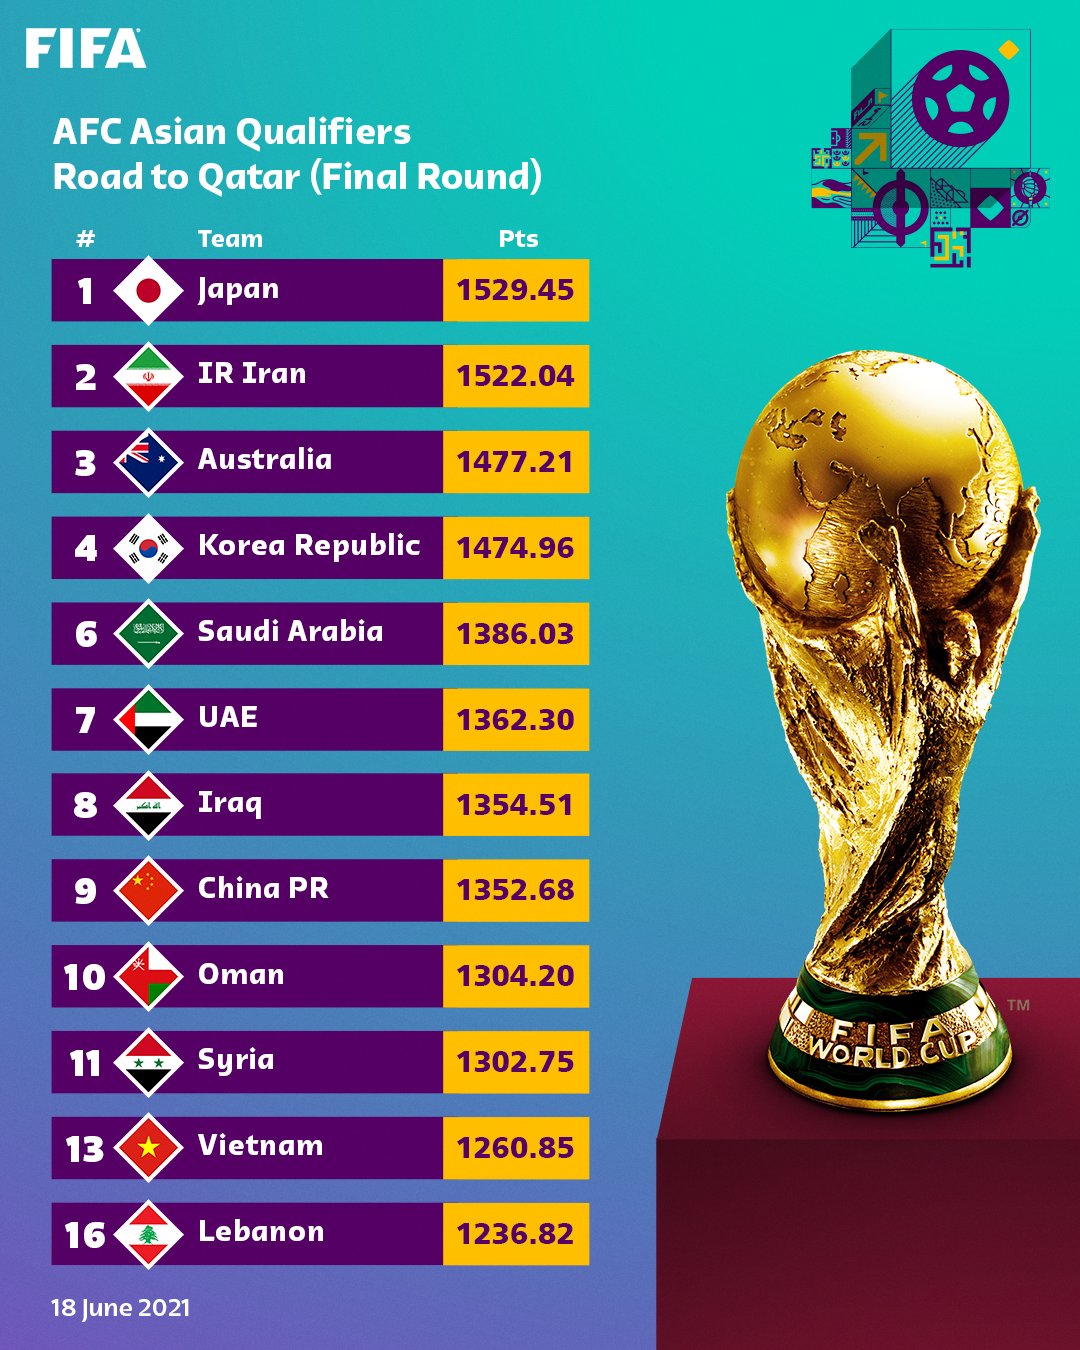 fifa-ranking-for-afc-third-round-world-cup-2022-qualifiers-team-melli